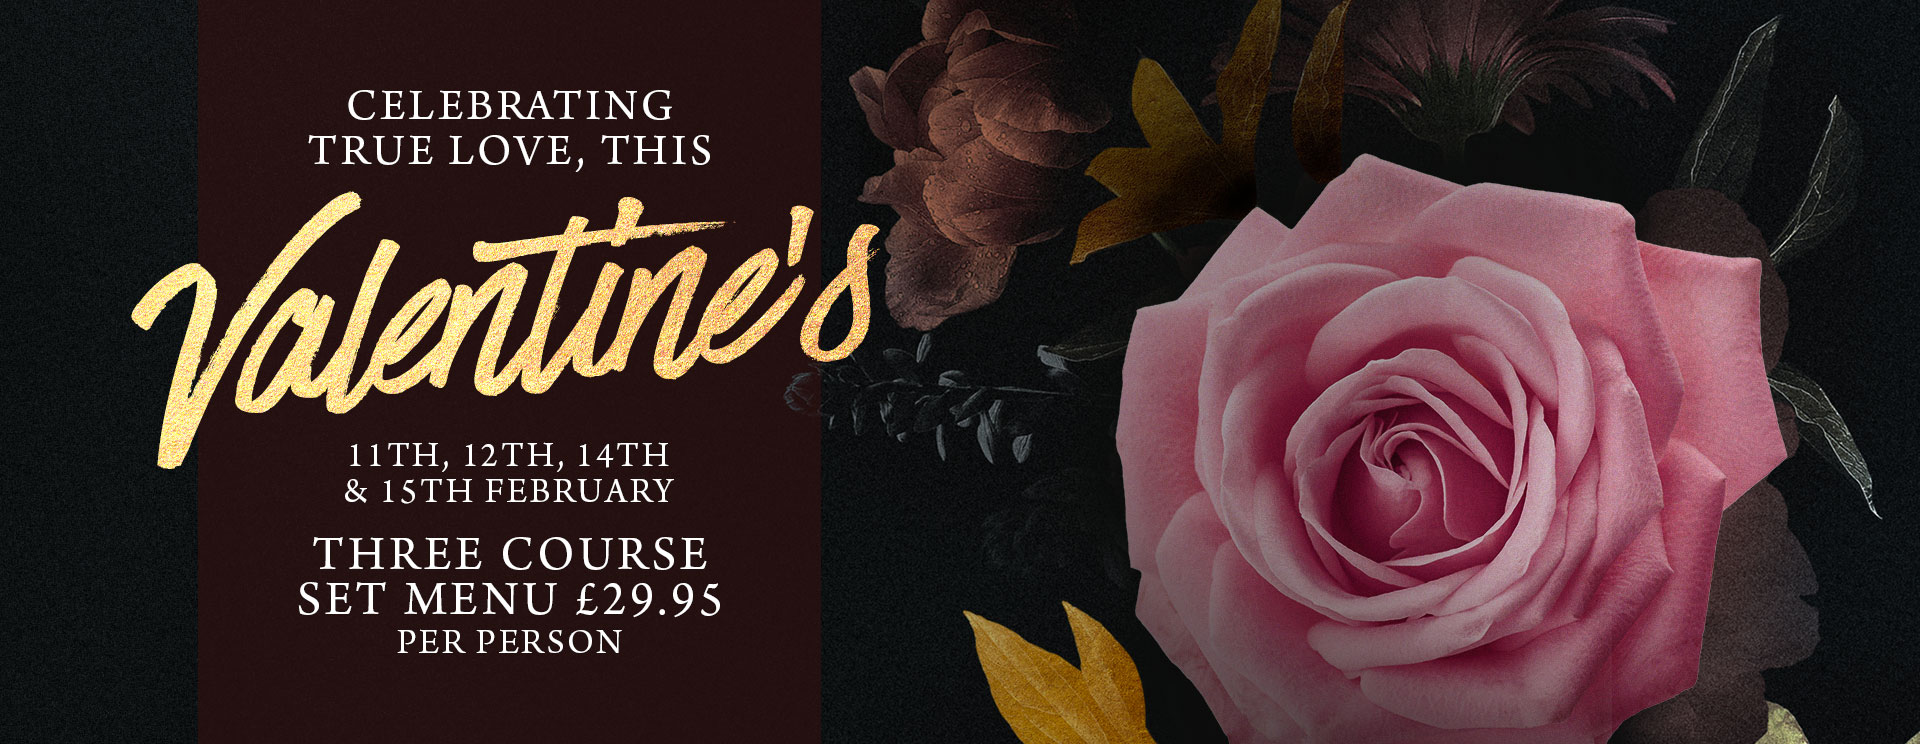 Valentines at The Seahorse